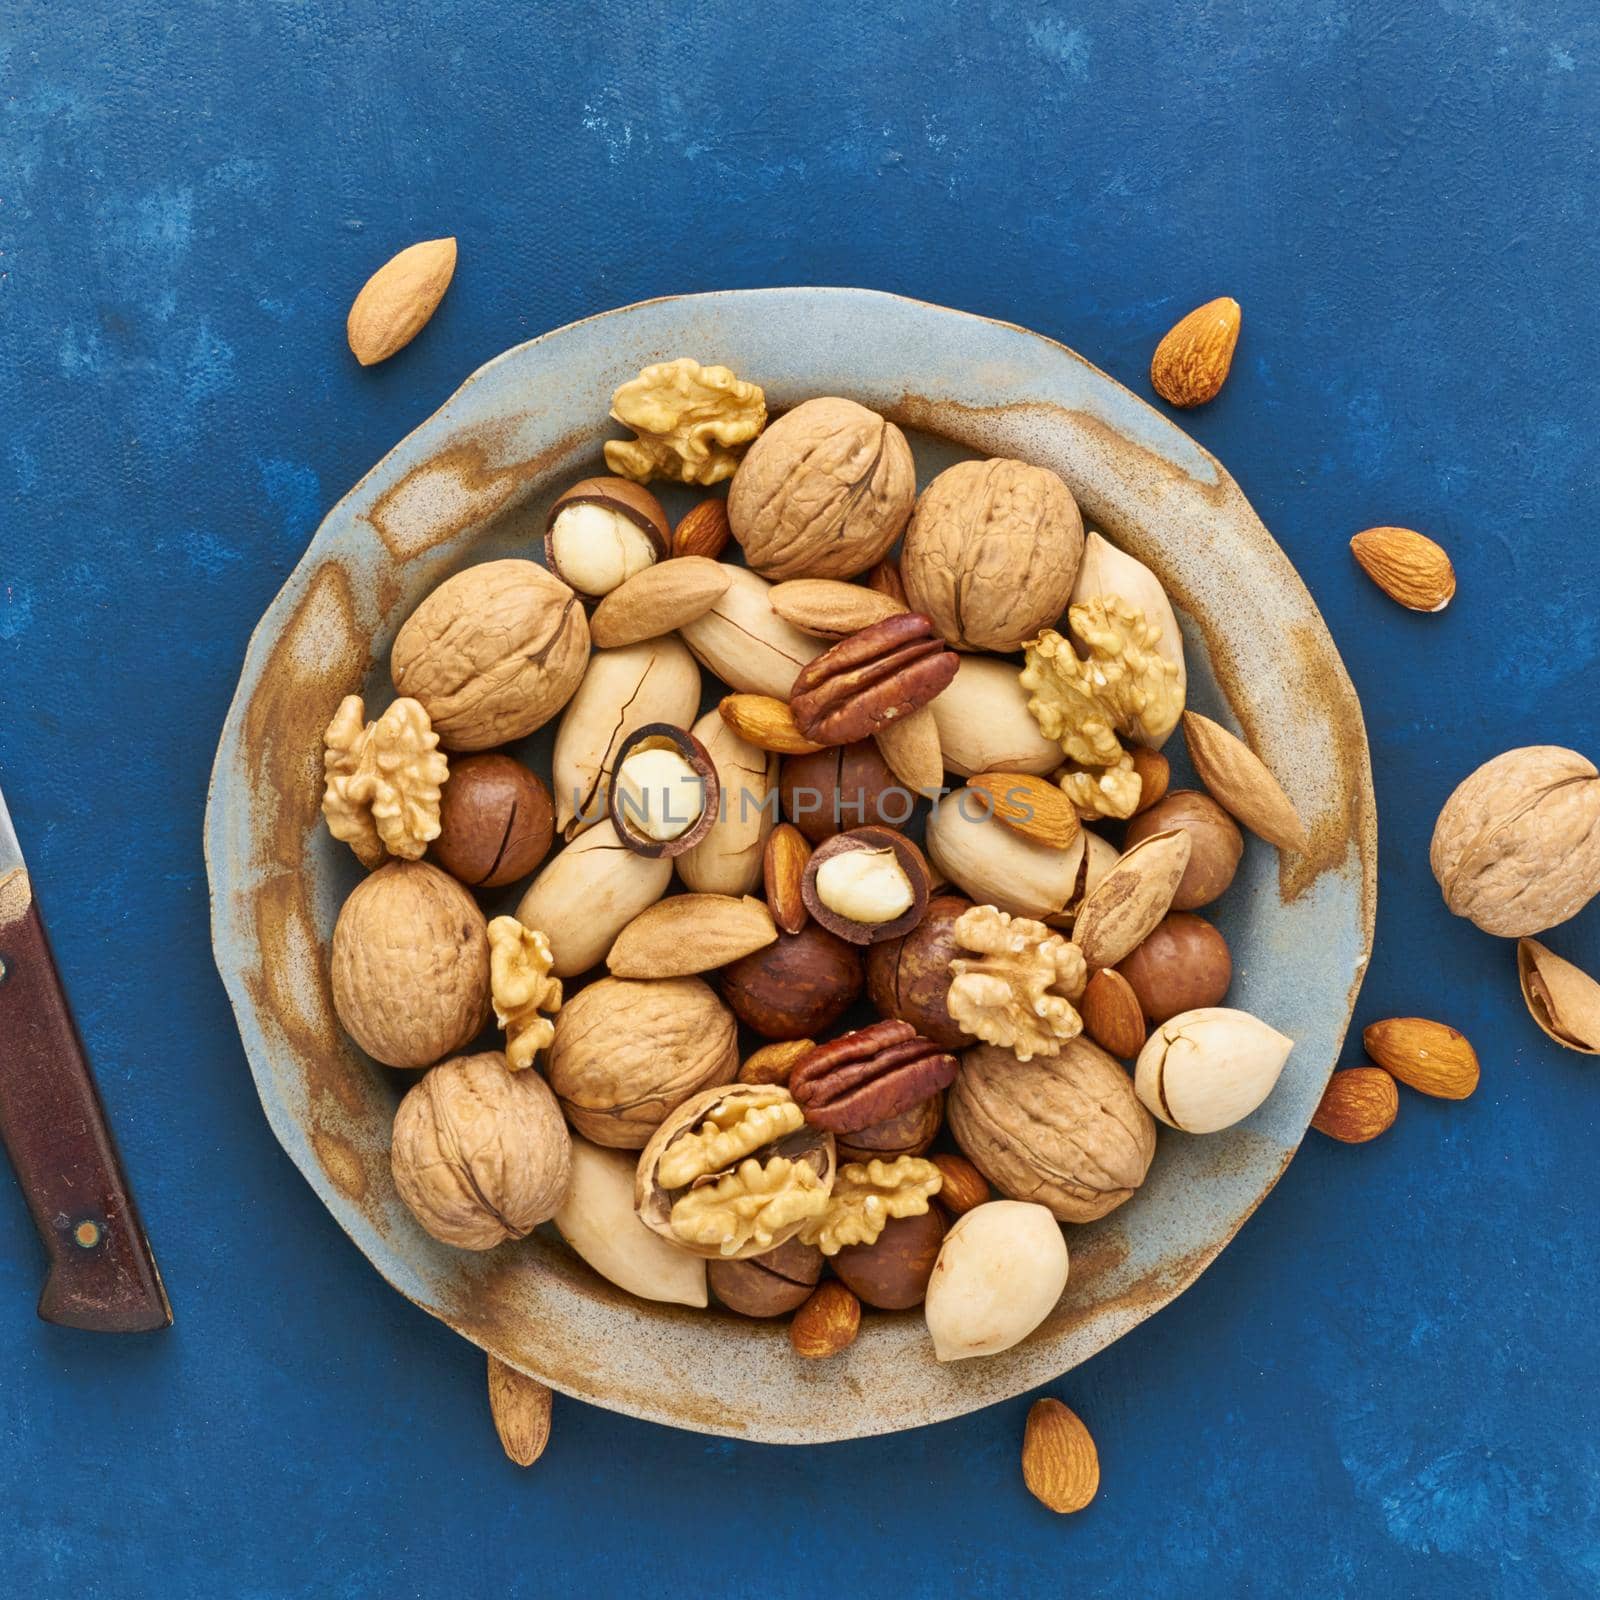 Classic blue in food. Mix of nuts on plate - walnut, almonds, pecans, macadamia and knife for opening shell. Healthy vegan food. Clean eating, balanced diet. Top view by NataBene